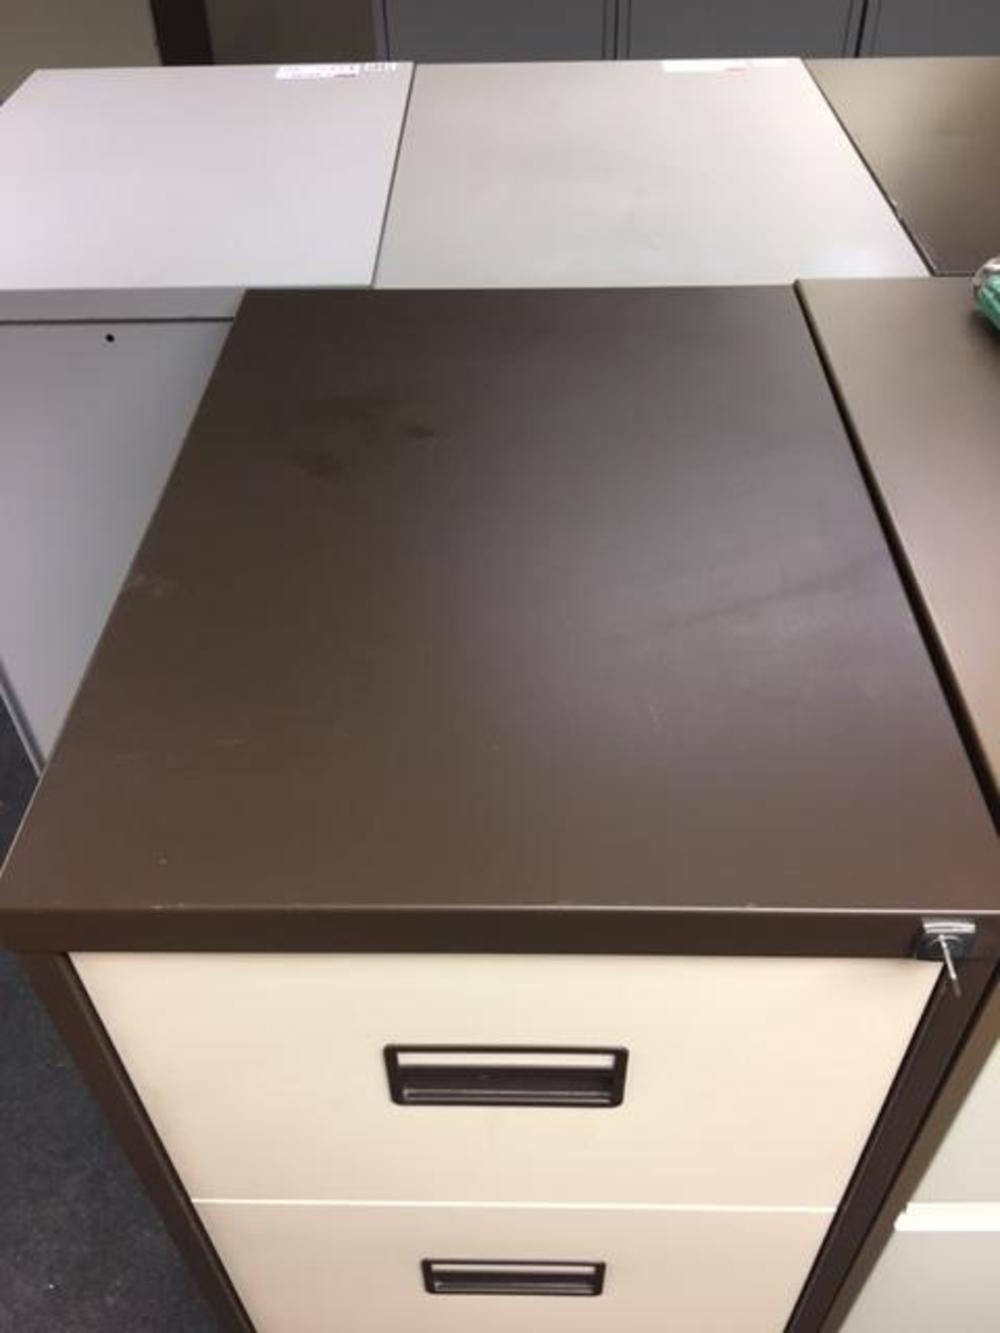 Silverline 4 Drawer Filing Cabinet Brown And Beige